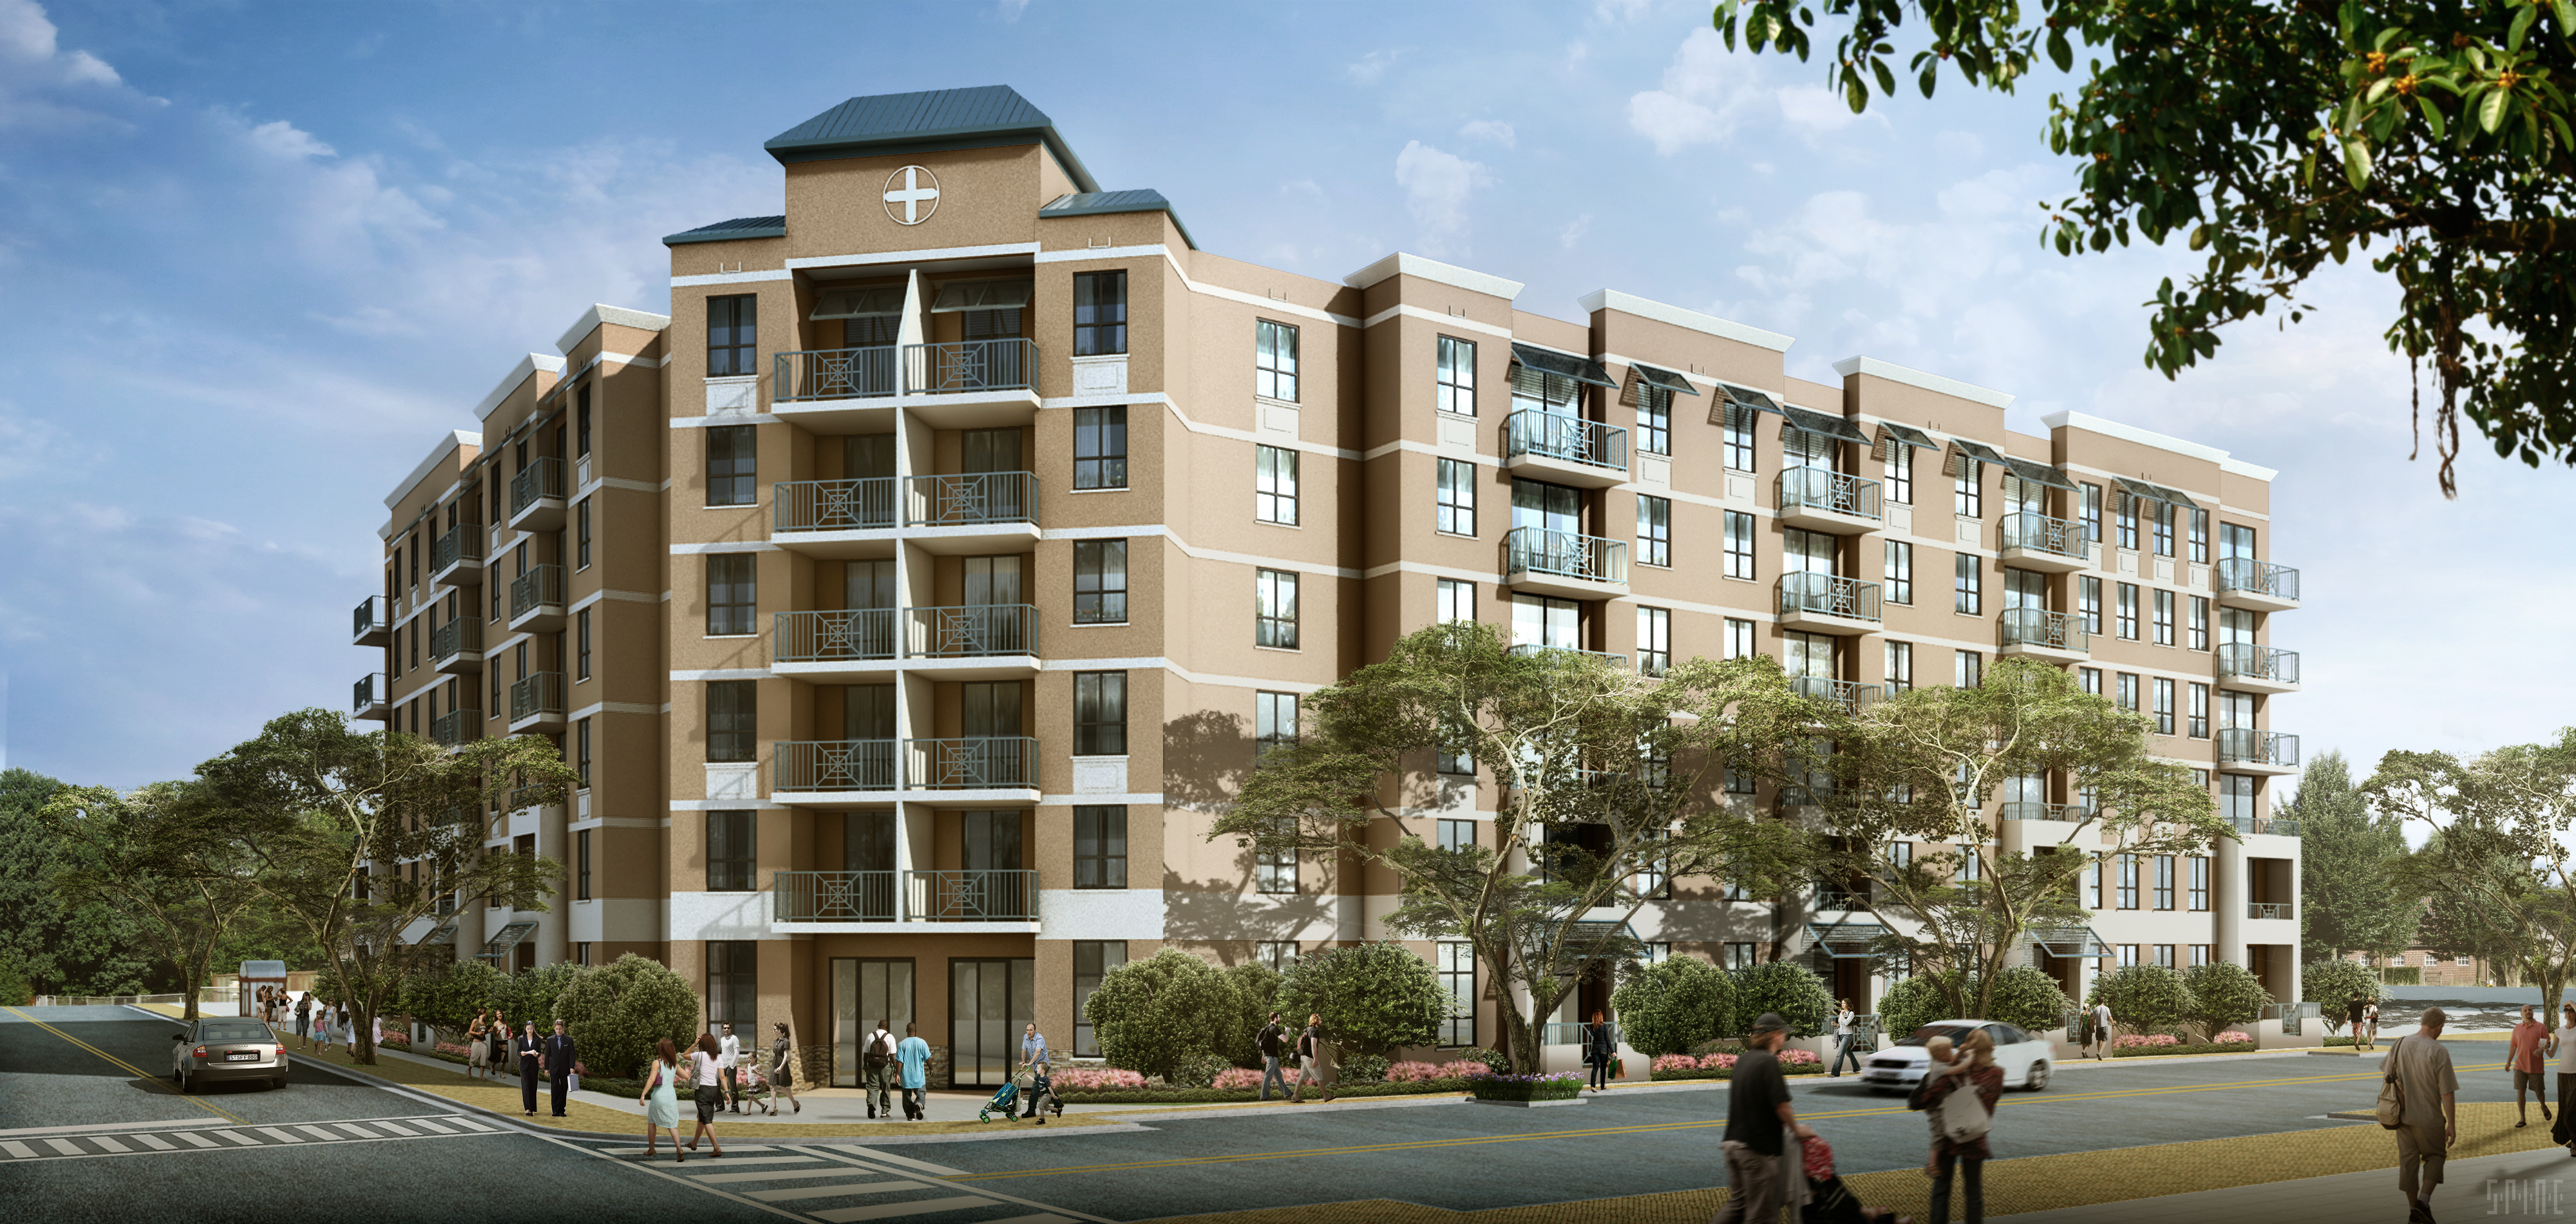 Rendering of the Courtside Family Apartments